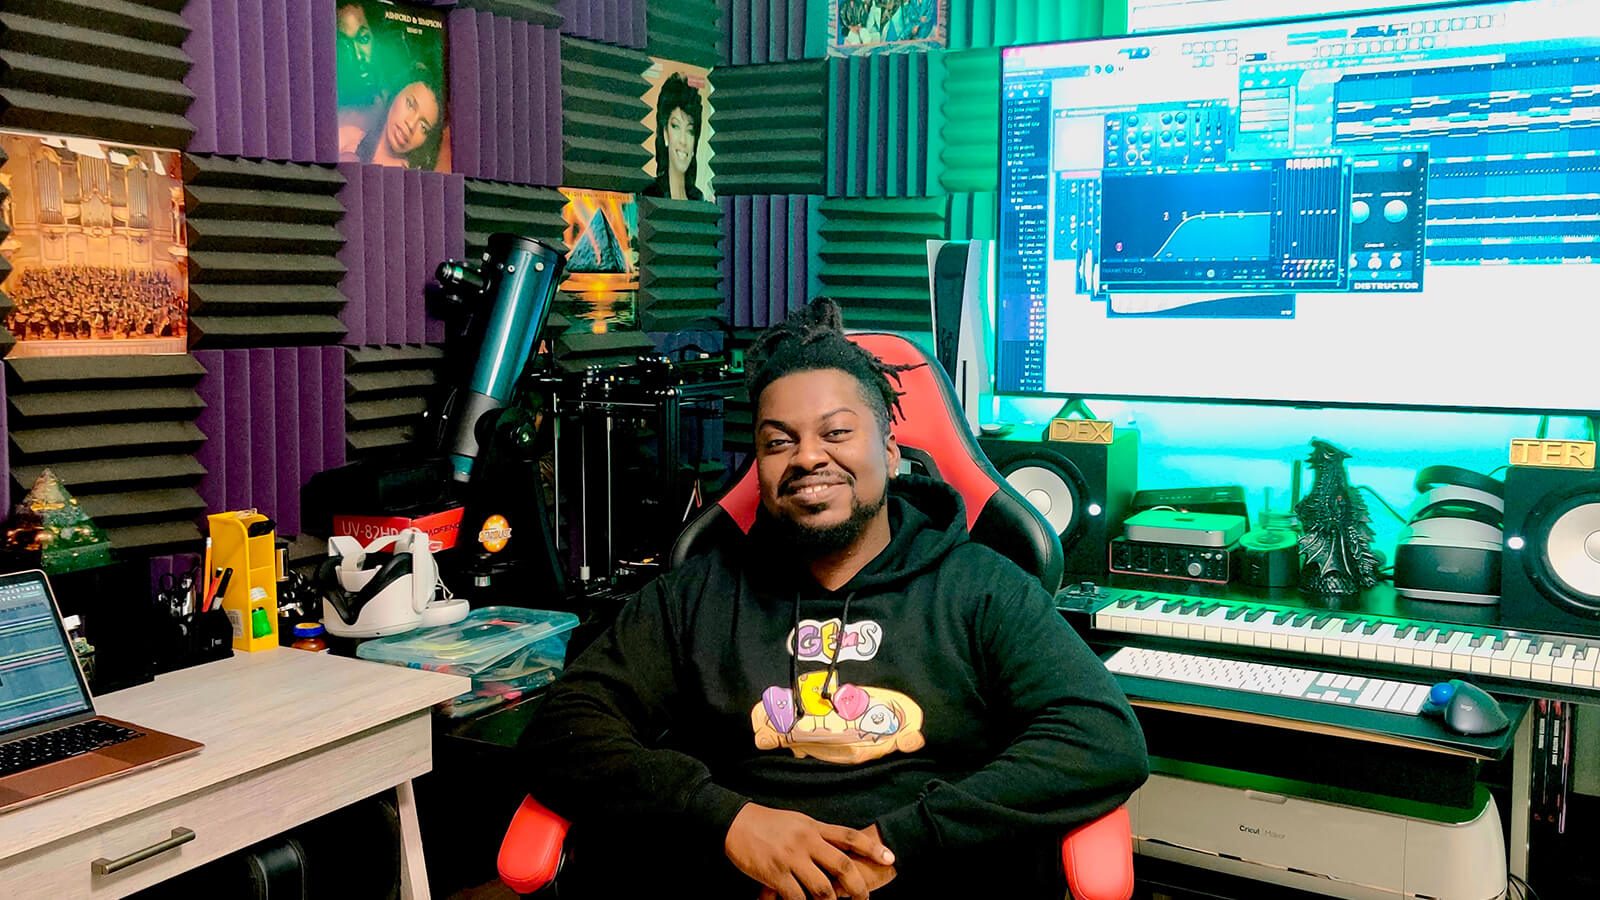 Grad Shawn Deshield smiling while seated at a desk in a home studio featuring a keyboard, audio equipment, and a large screen displaying audio software while wearing a black hooded sweatshirt with a colorful design.